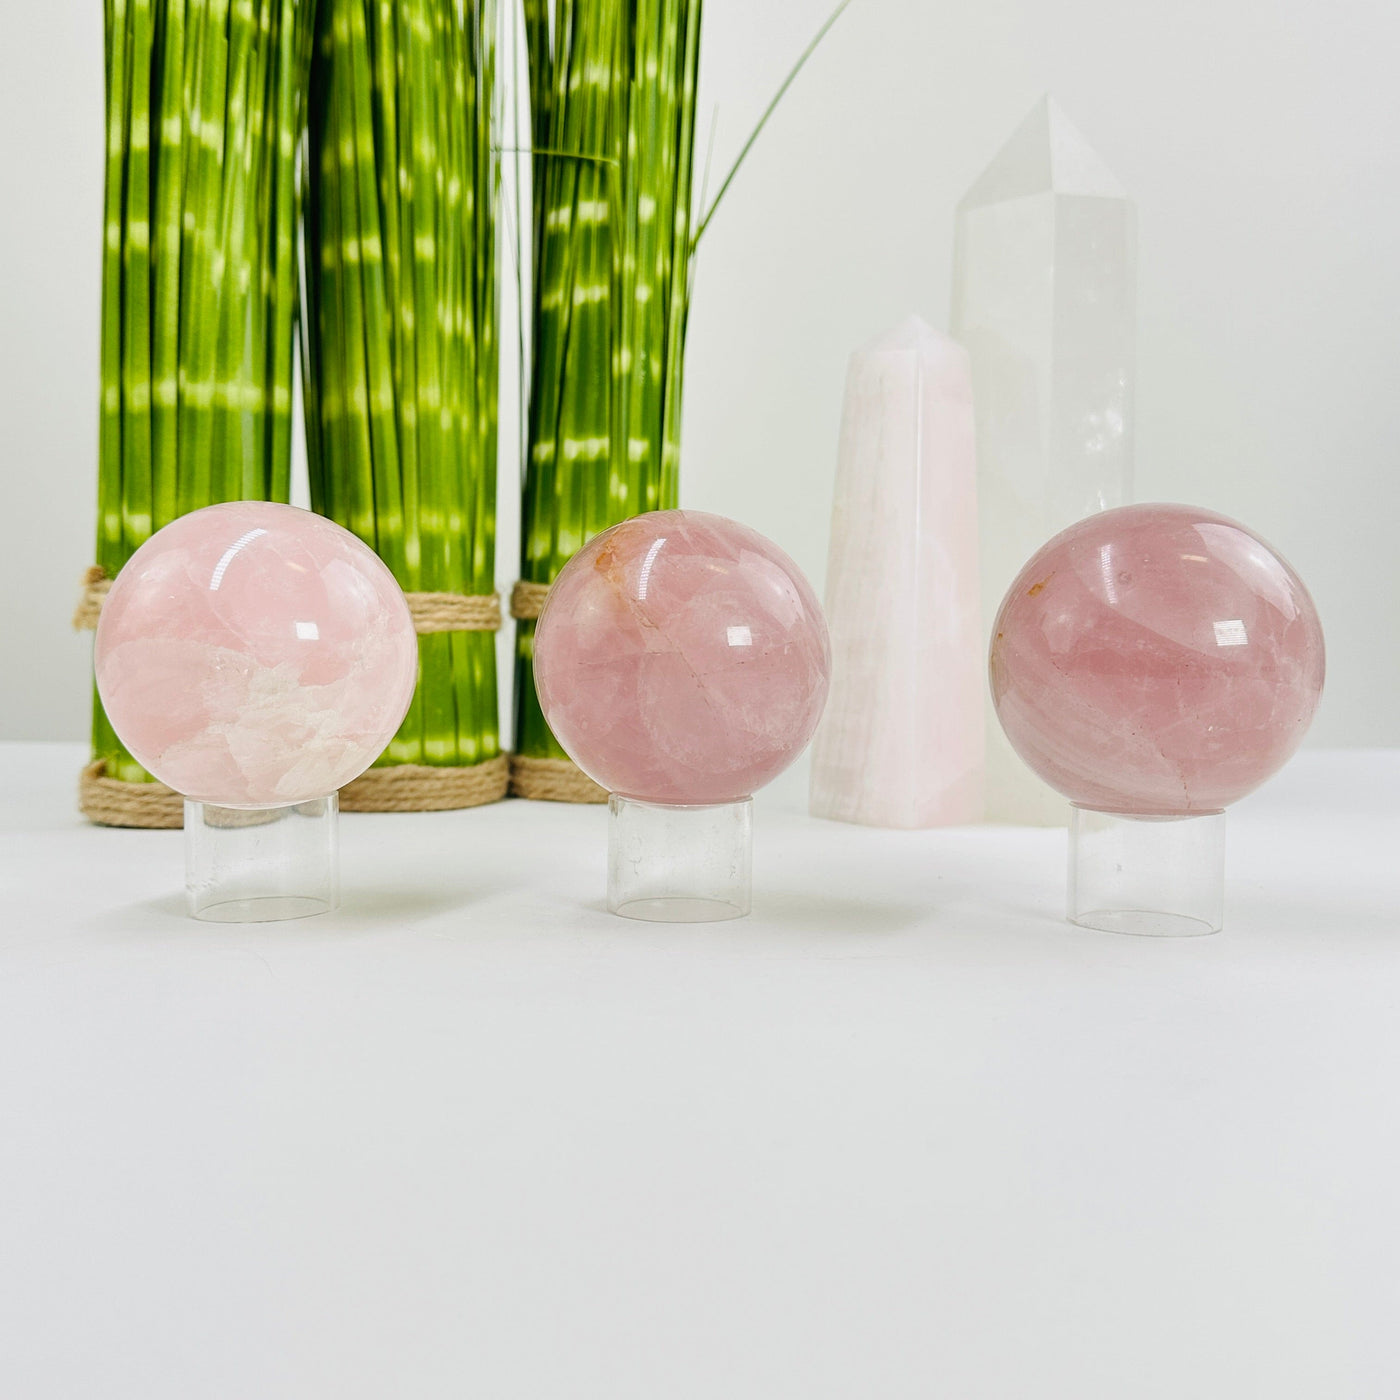 rose quartz spheres with decorations in the background